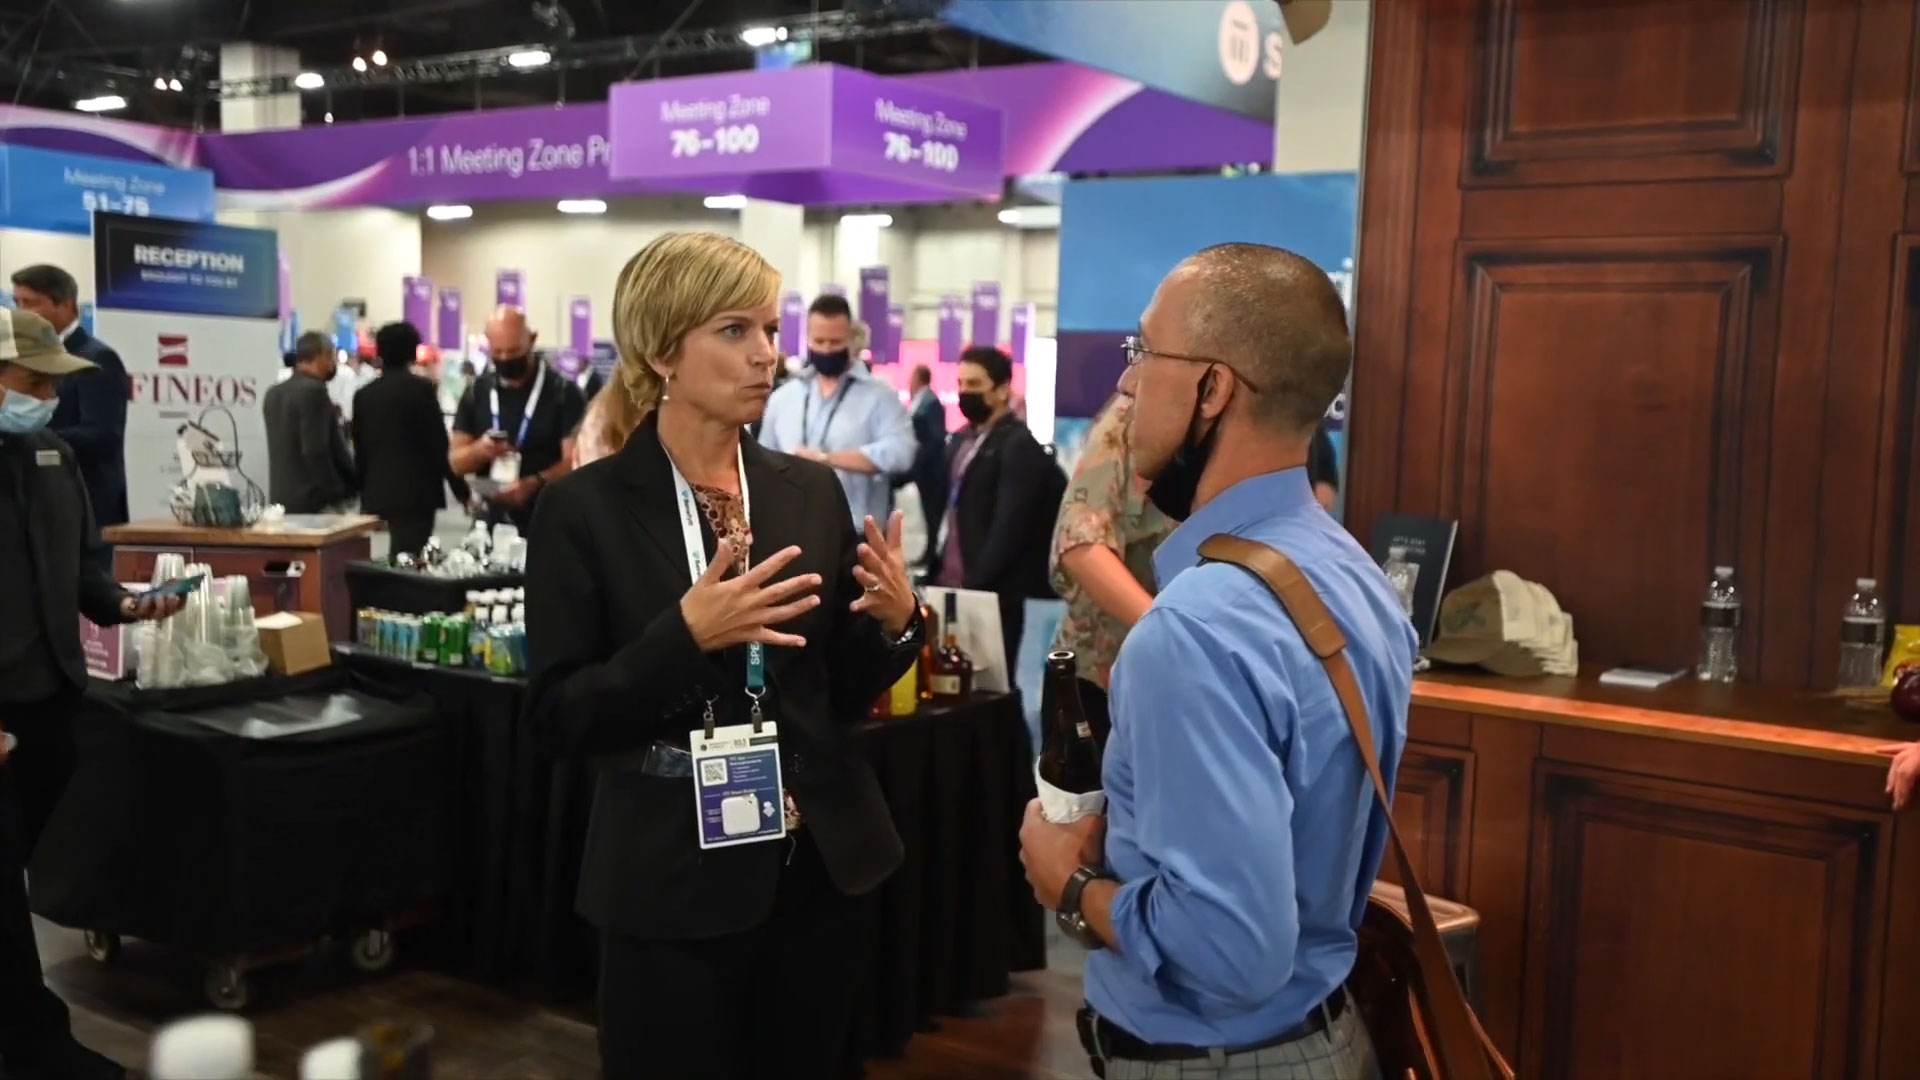 Take a peek at what you can expect when the Group Benefits industry comes together for the premier annual event, GroupTech Connect at ITC Vegas, sponsored by FINEOS.